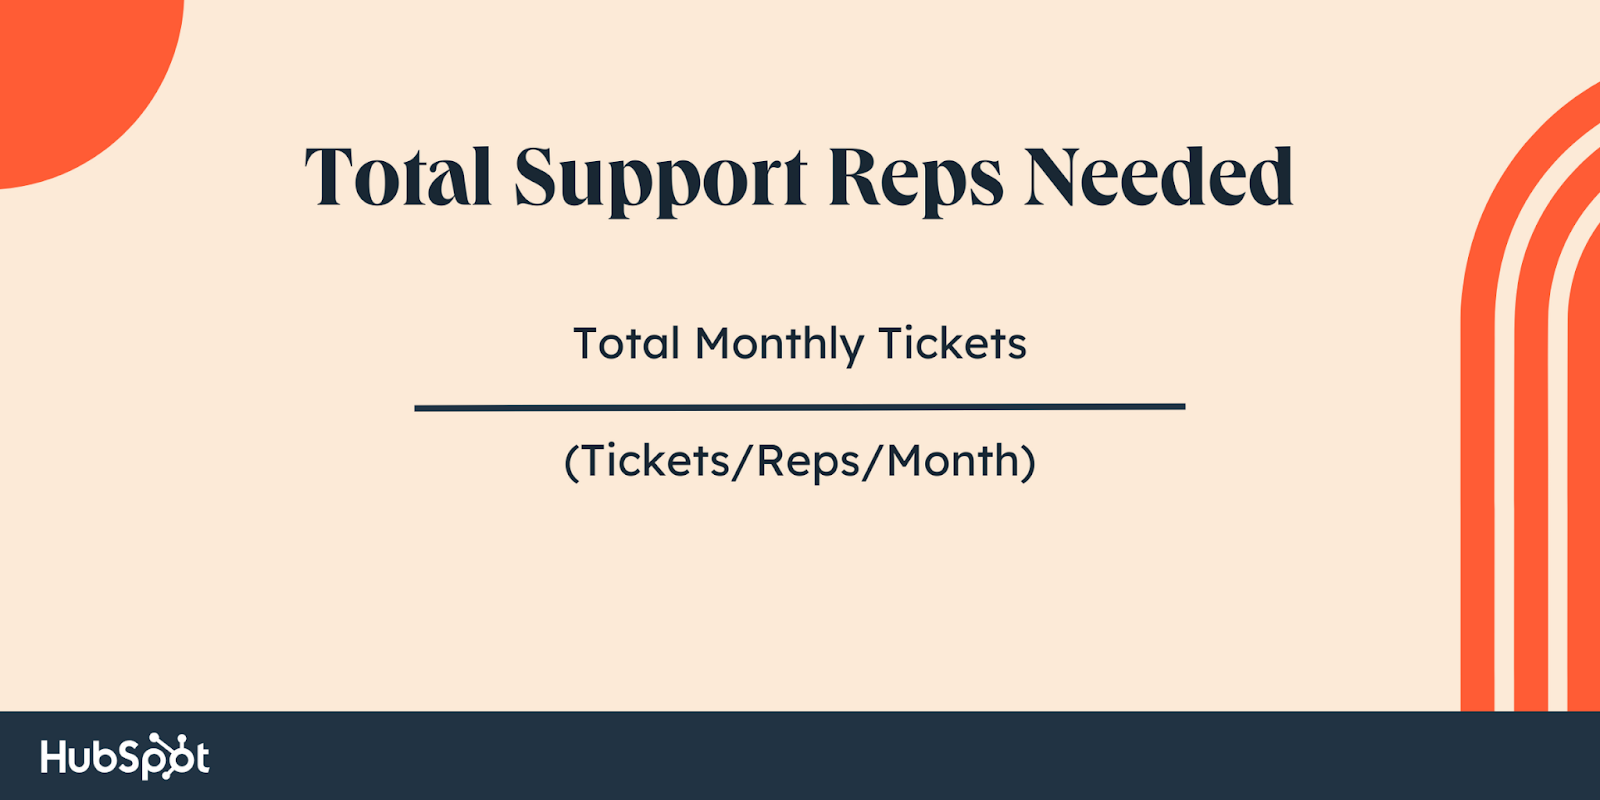 Total Support Reps Needed =Total Monthly Tickets / (Tickets/Reps/Month)